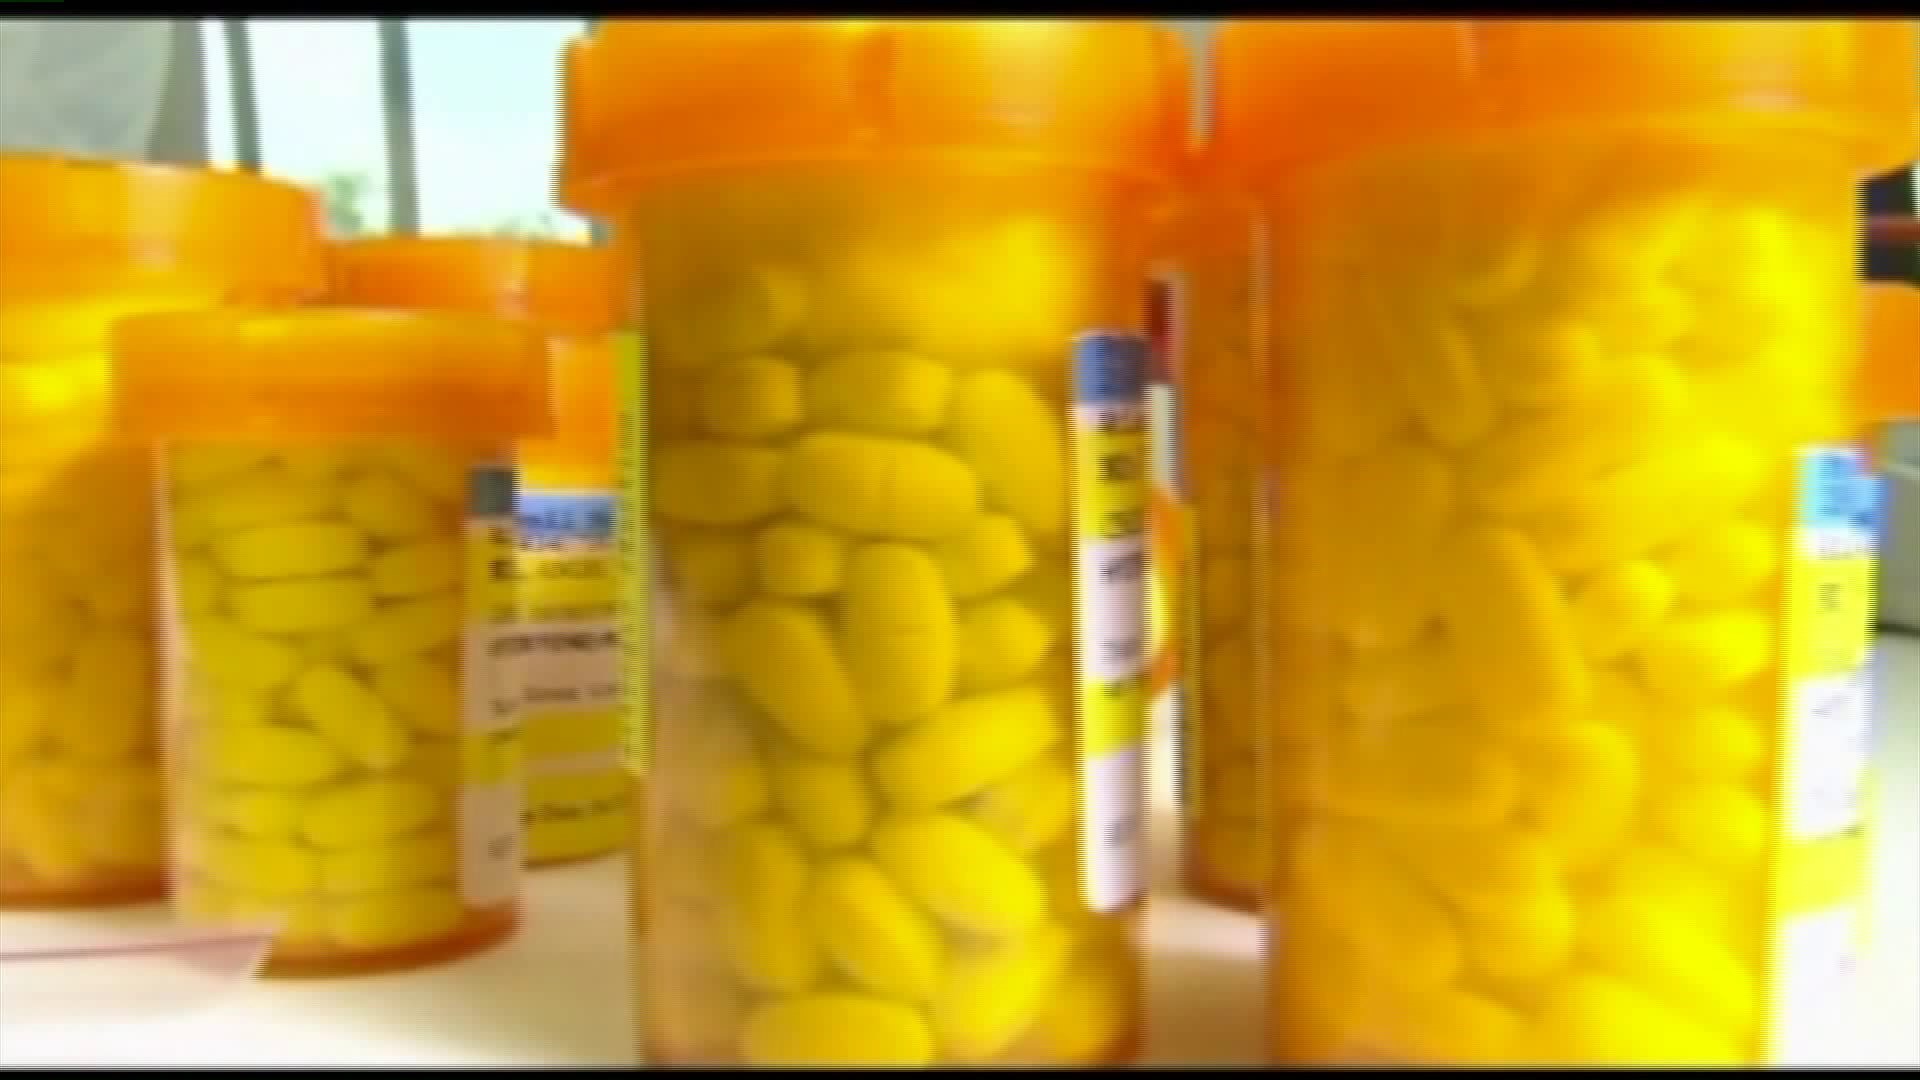 State details ways it`s fighting opioid crisis